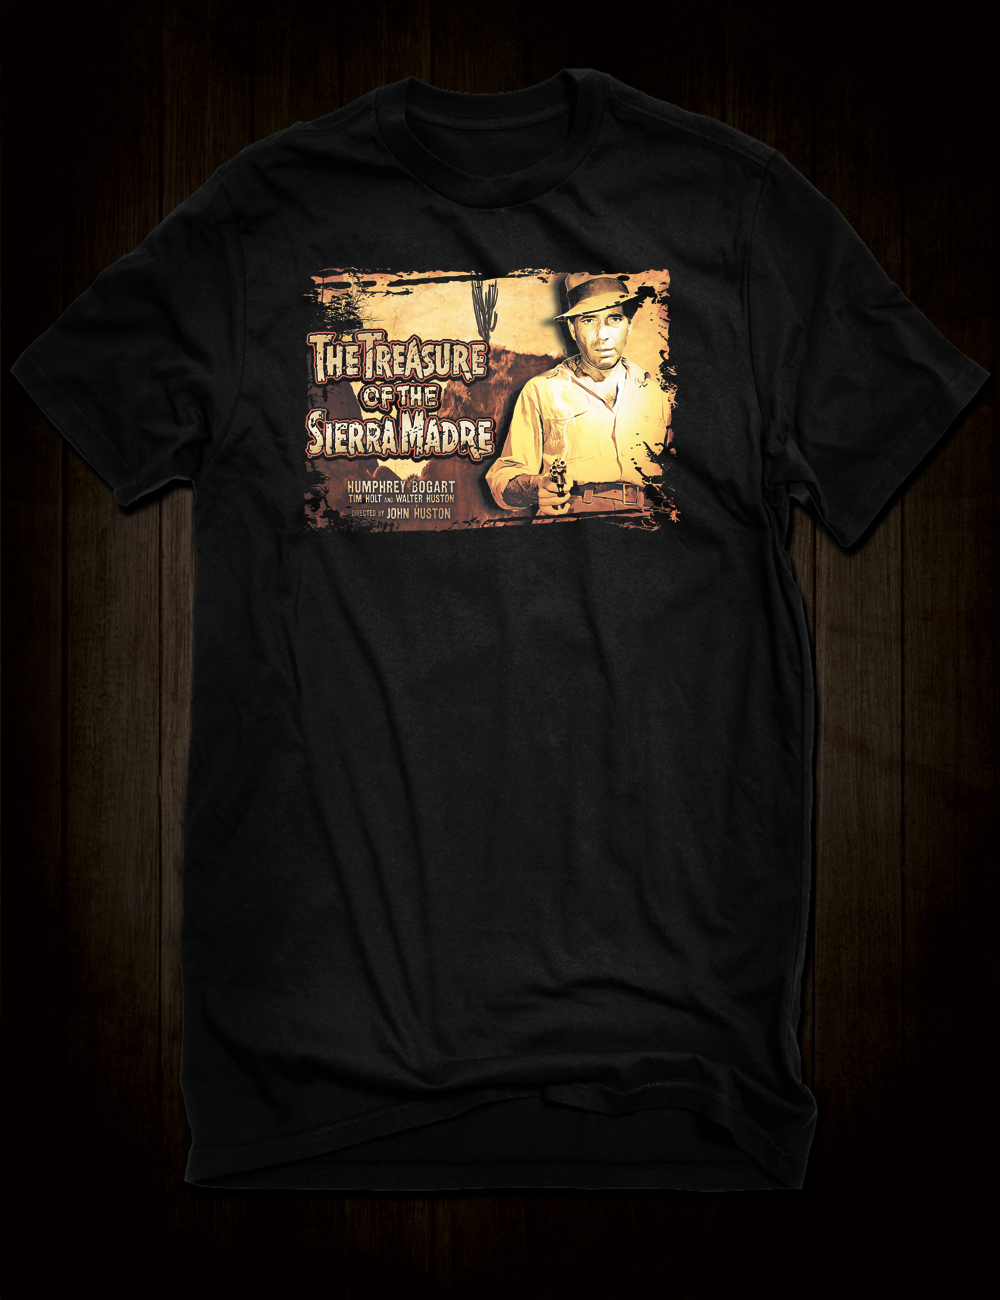 The Treasure of the Sierra Madre T-Shirt